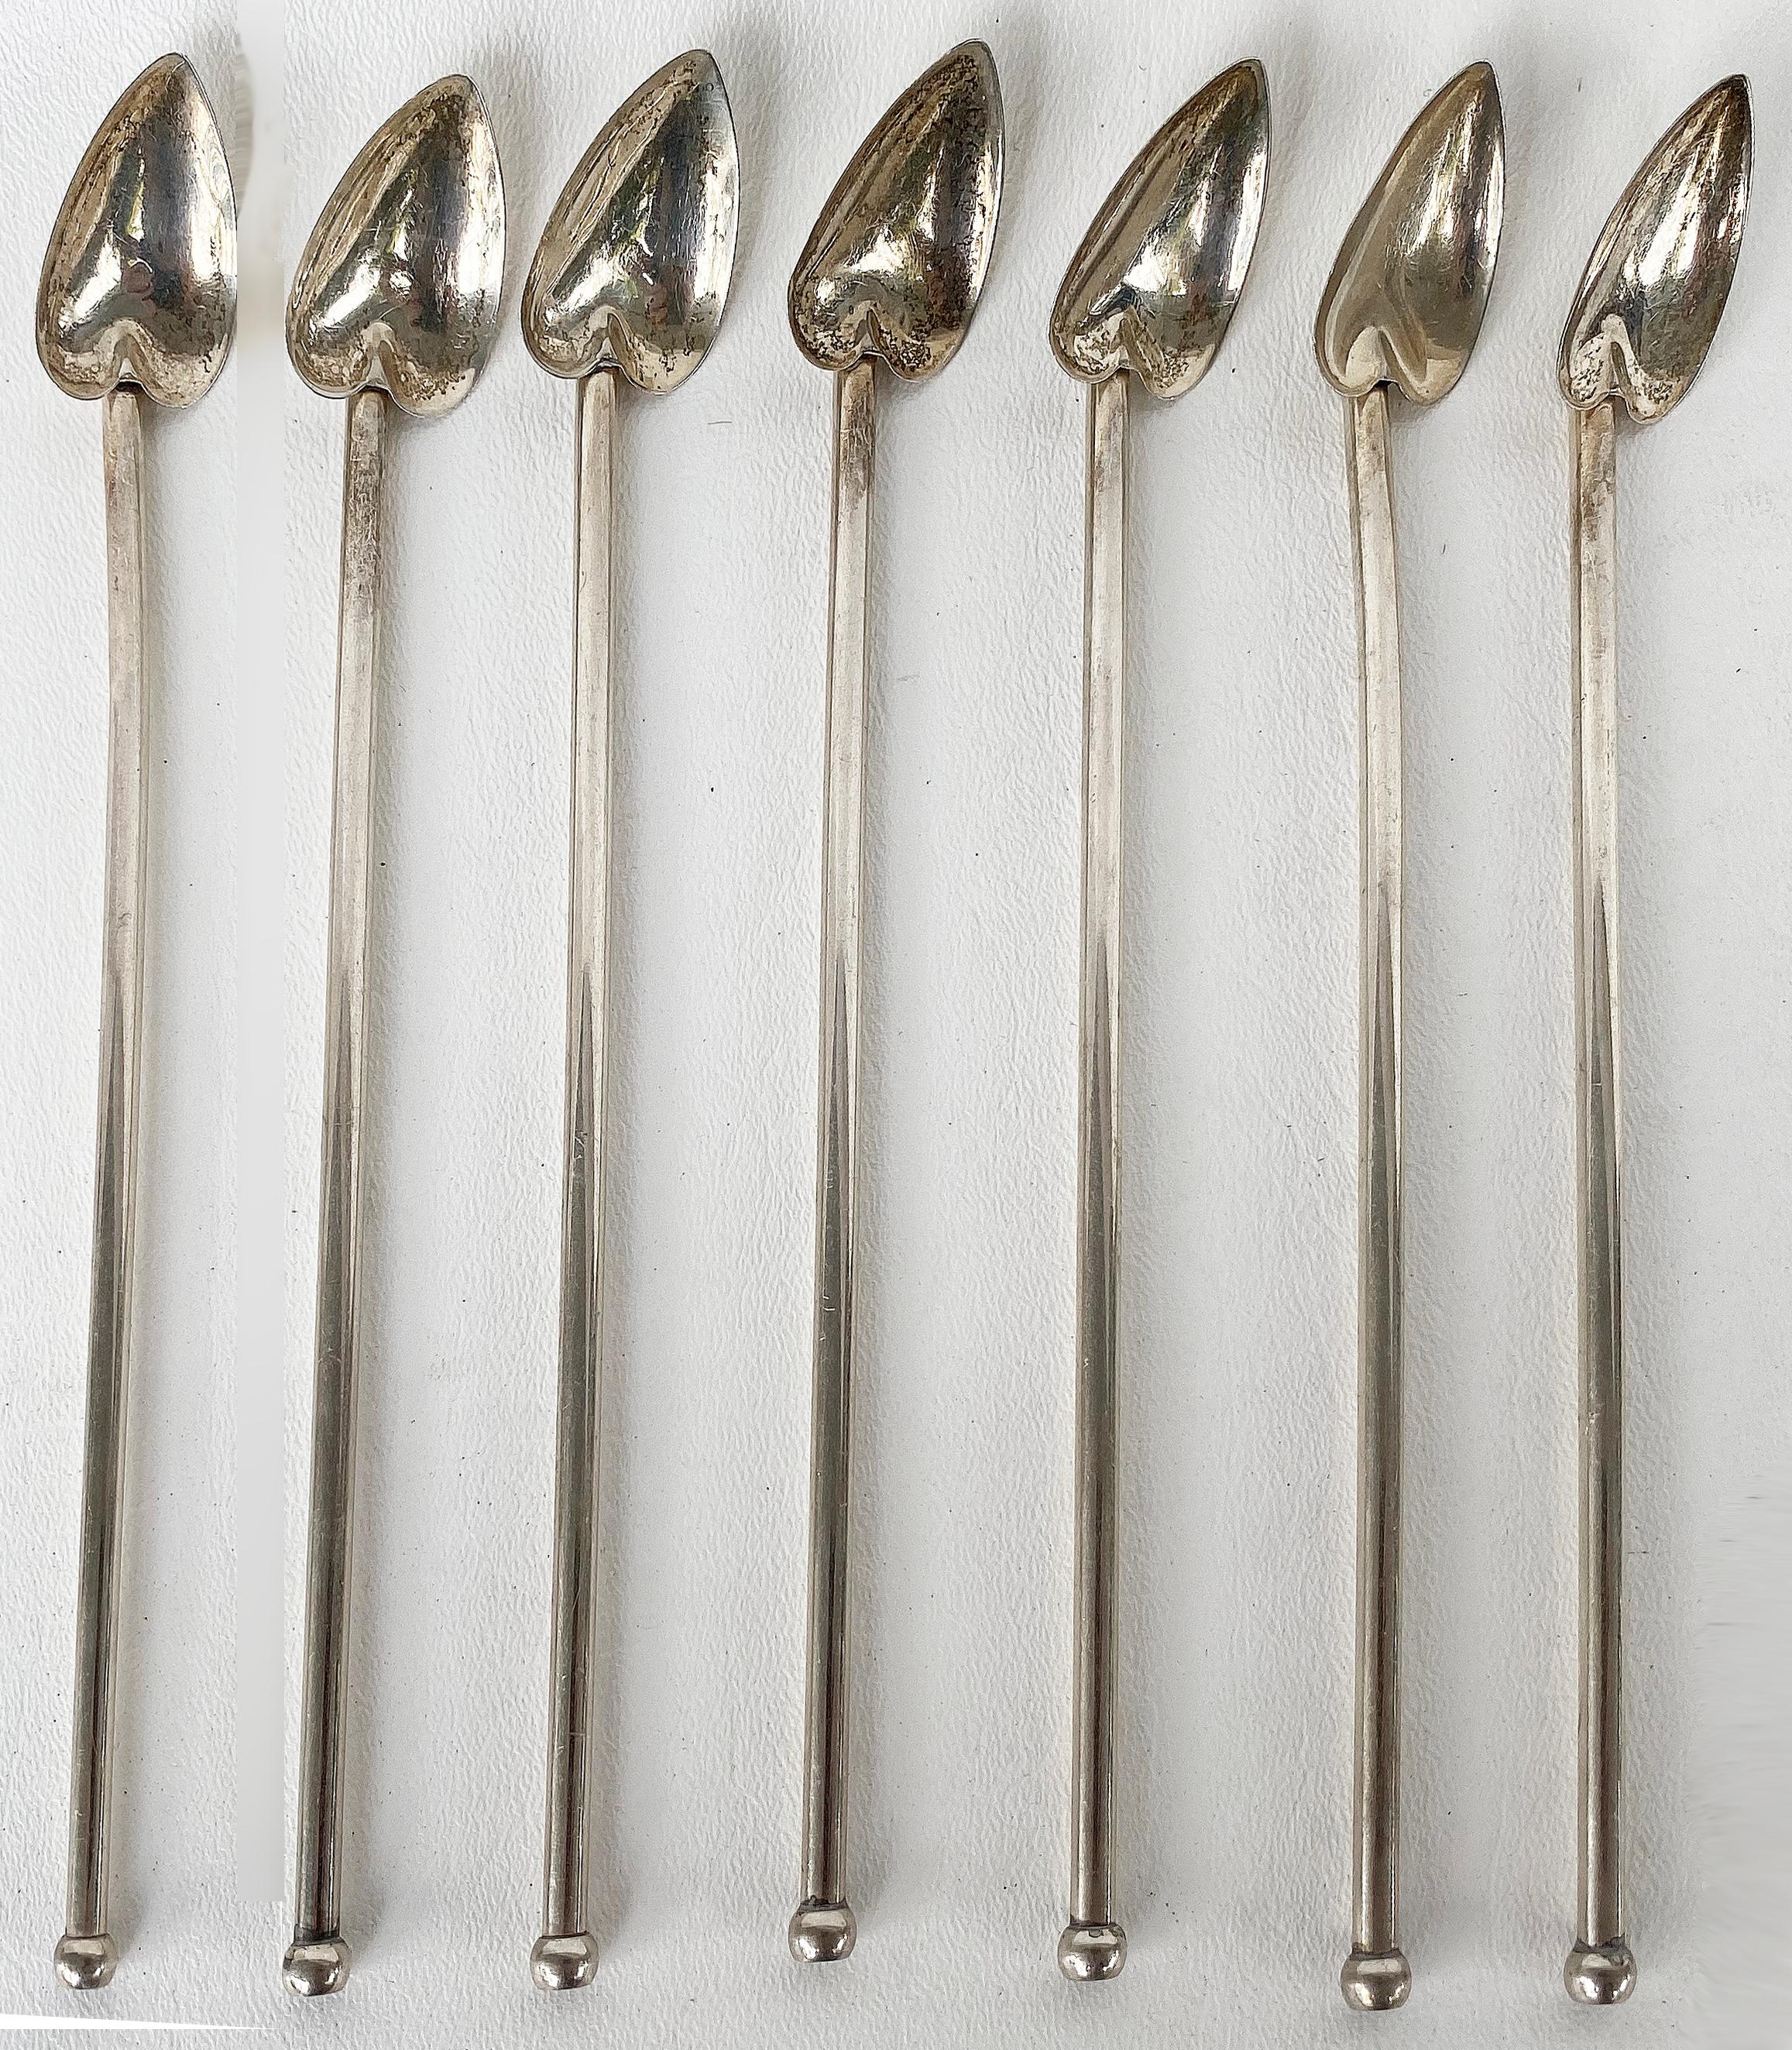 Sterling silver heart-shaped tea spoon straws, set of 12, Italian 

Offered for sale is a set of 12 sterling silver heart-shaped drinks straws. The set includes 5 slightly longer straws and 7 slightly shorter ones. They are a combination of two